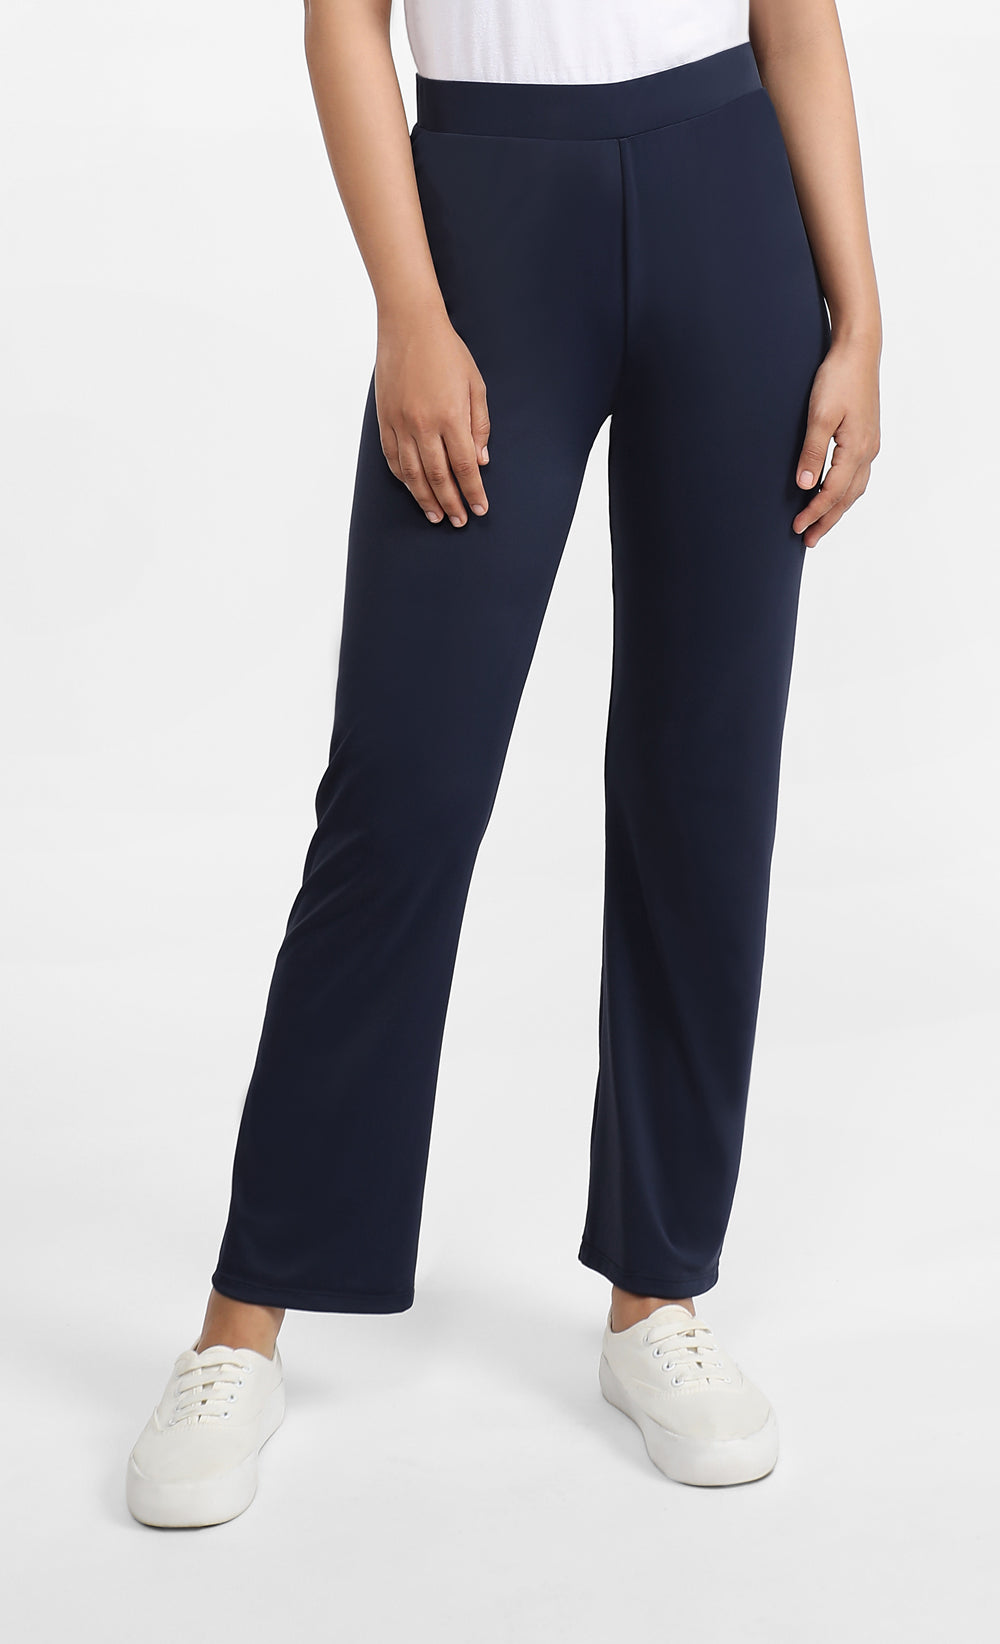 Regular Fit Yoga Pants in Navy Blue – LILIT. Store